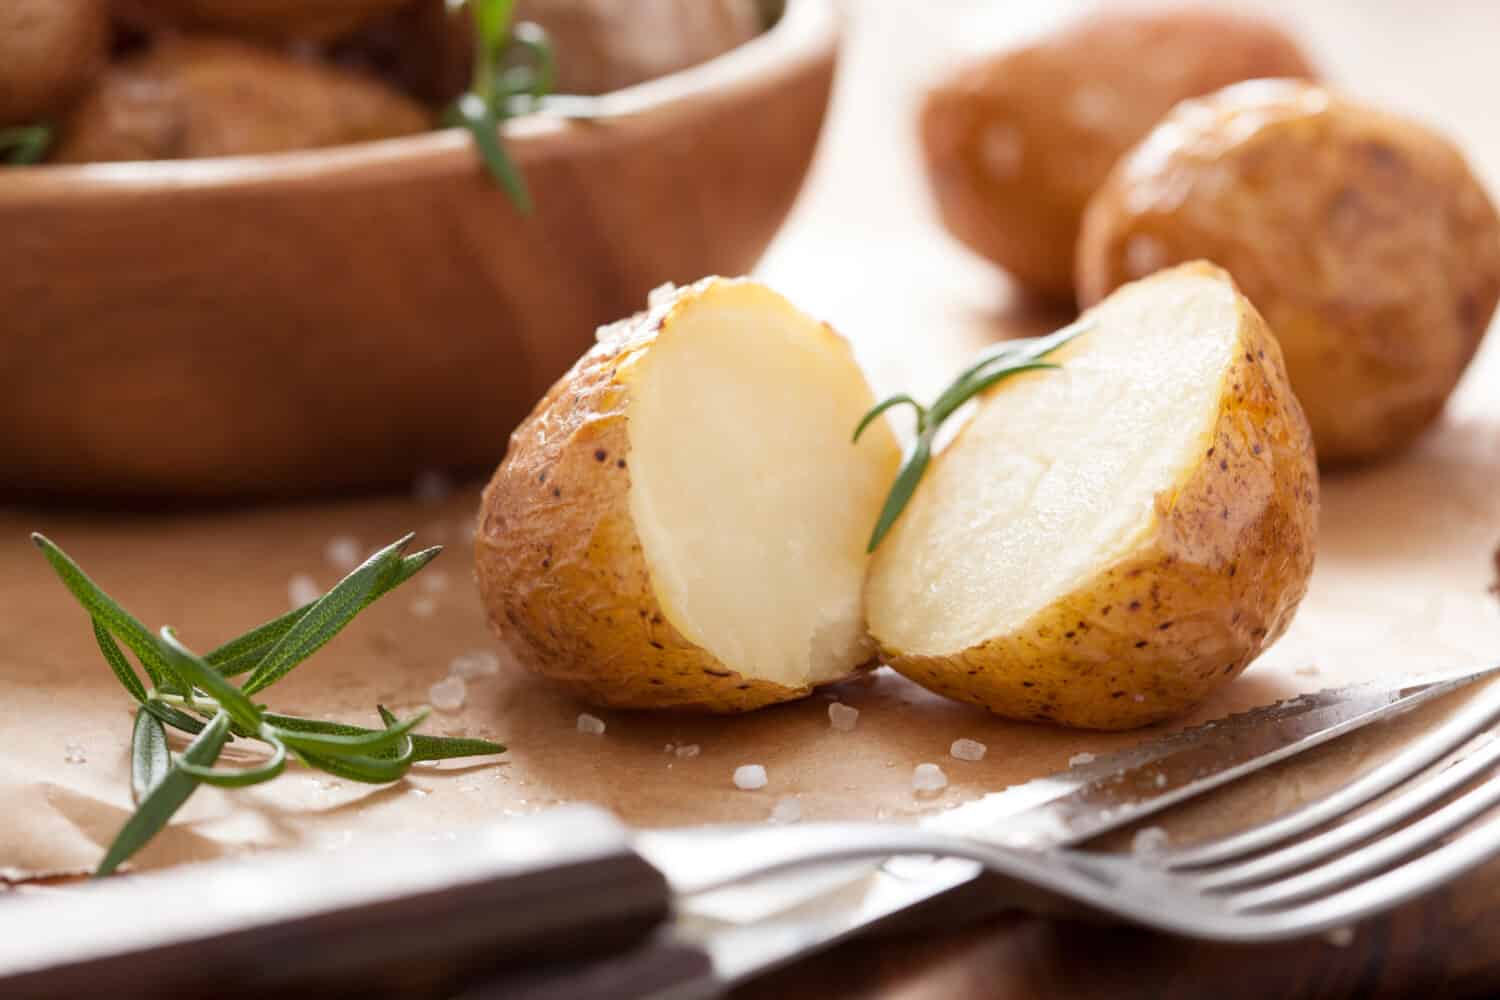 baked potatoes with rosemary